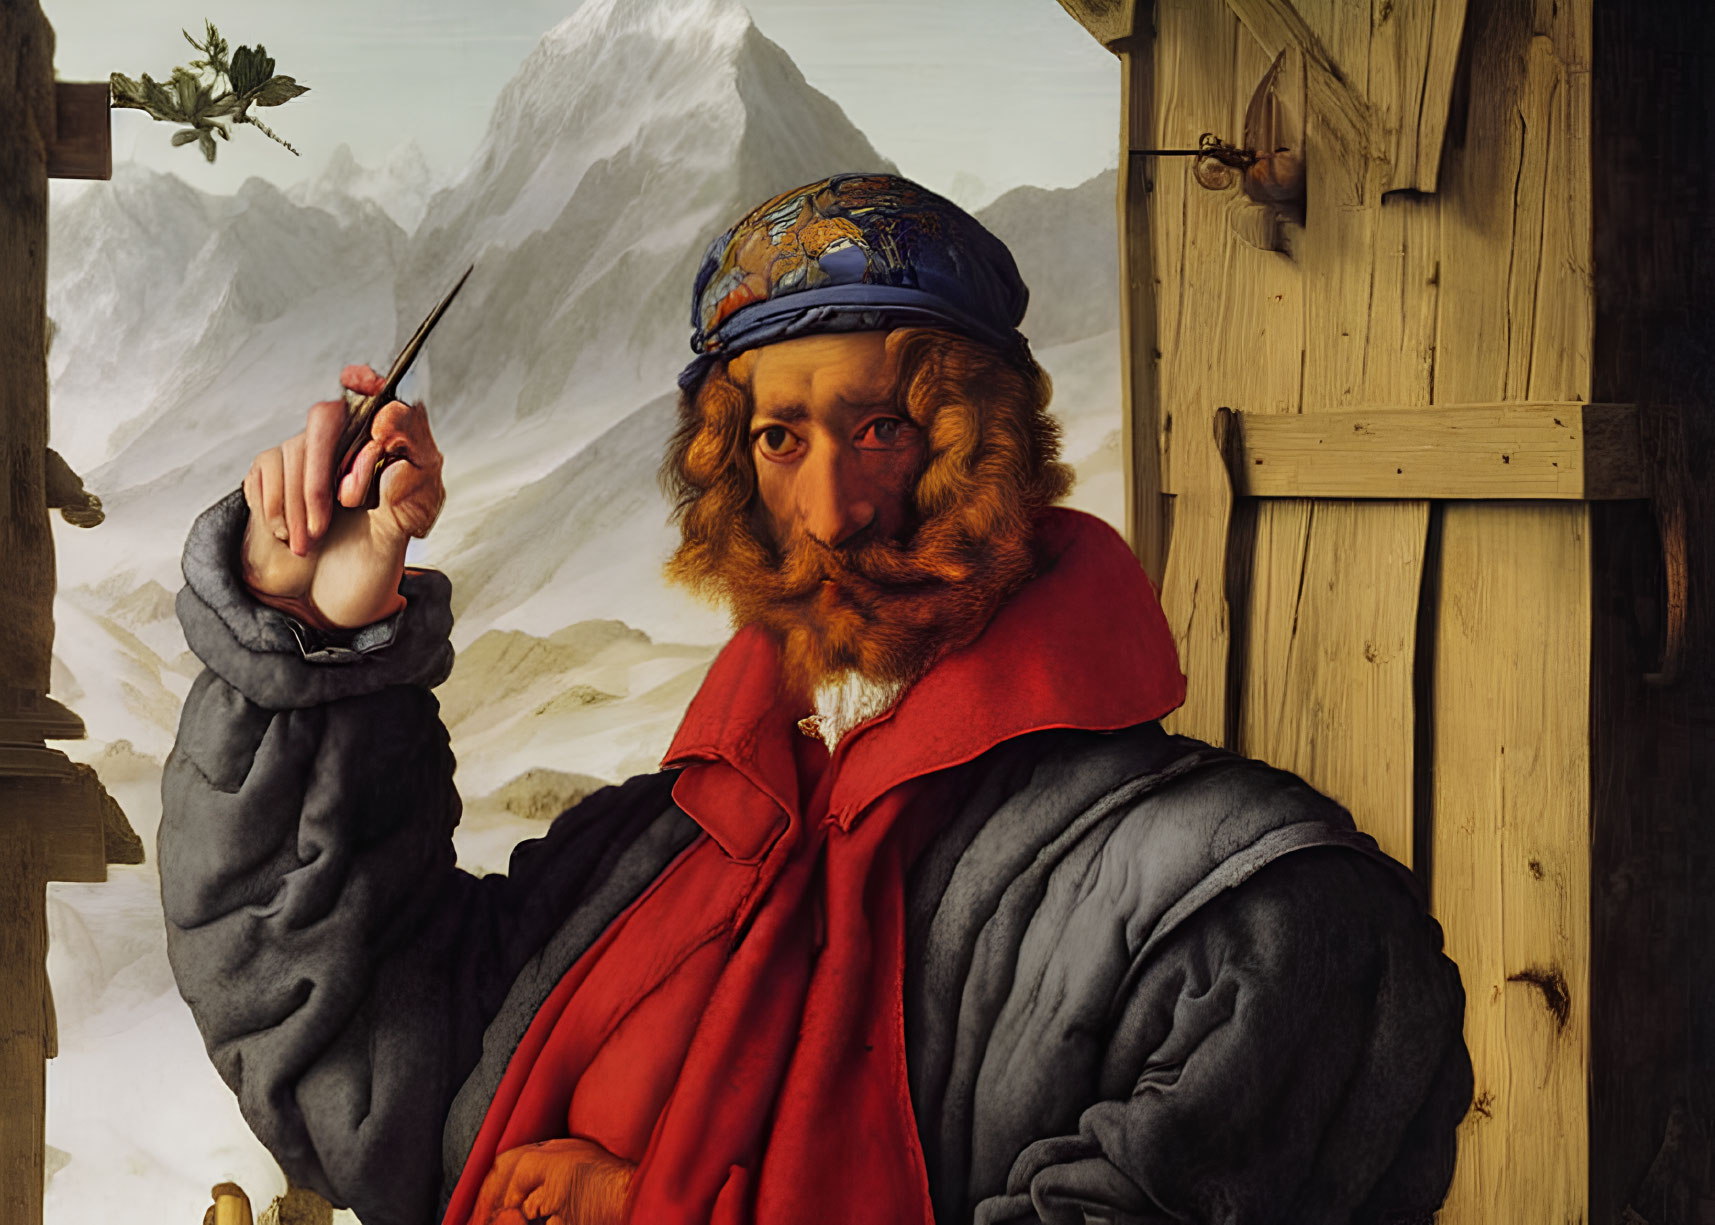 Portrait of Bearded Man in Red and Black Robe with Pen, Alpine Backdrop, and Wooden